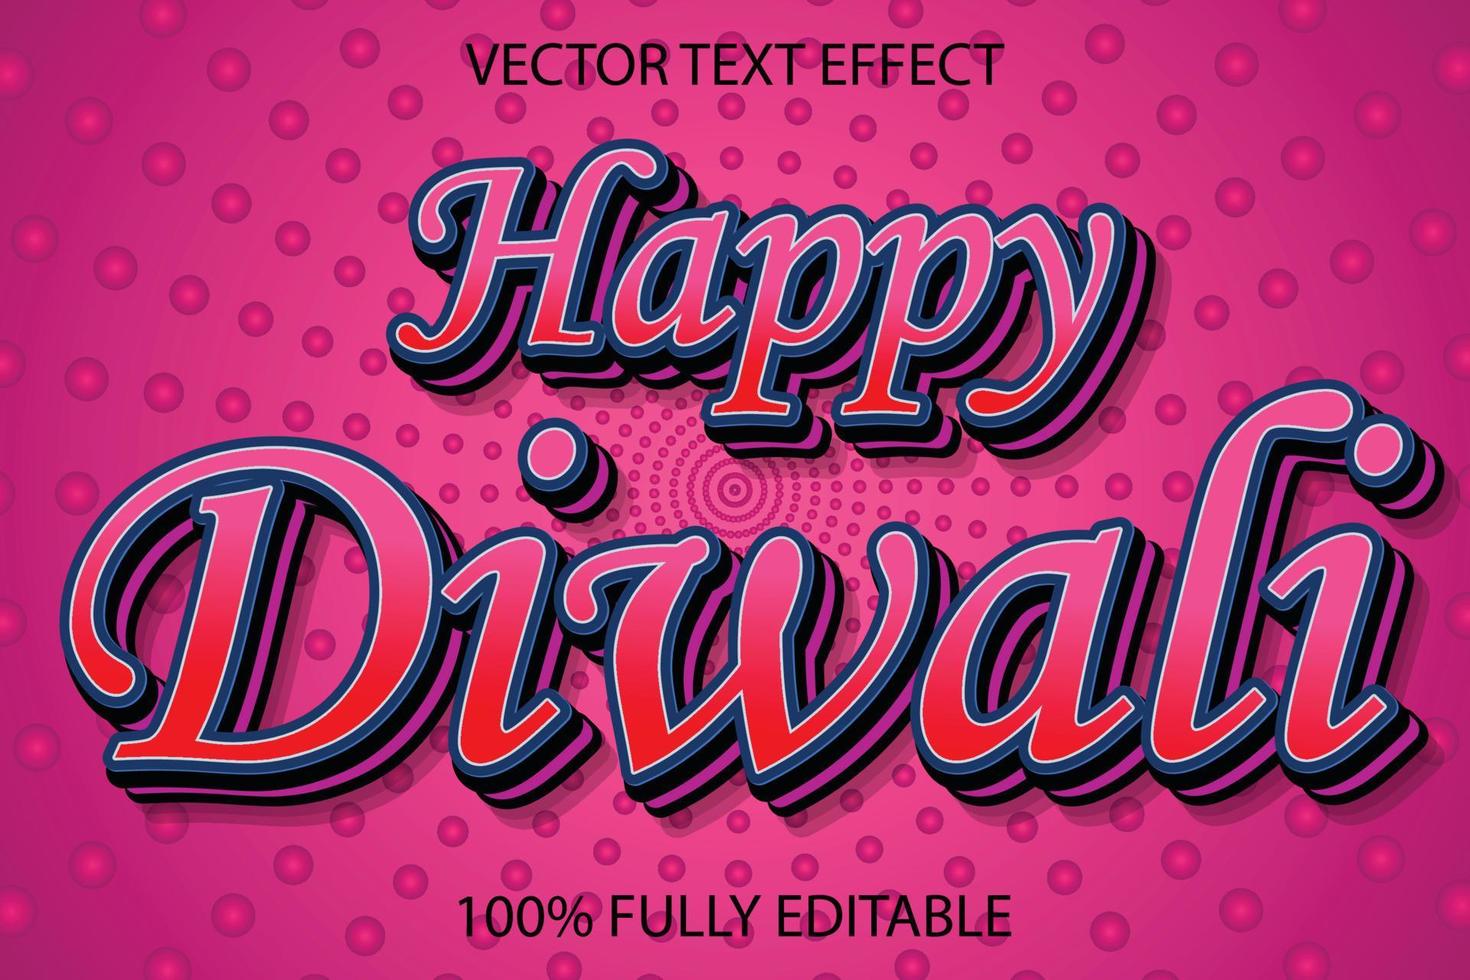 Happy Diwali text effect vector with colorful pink background